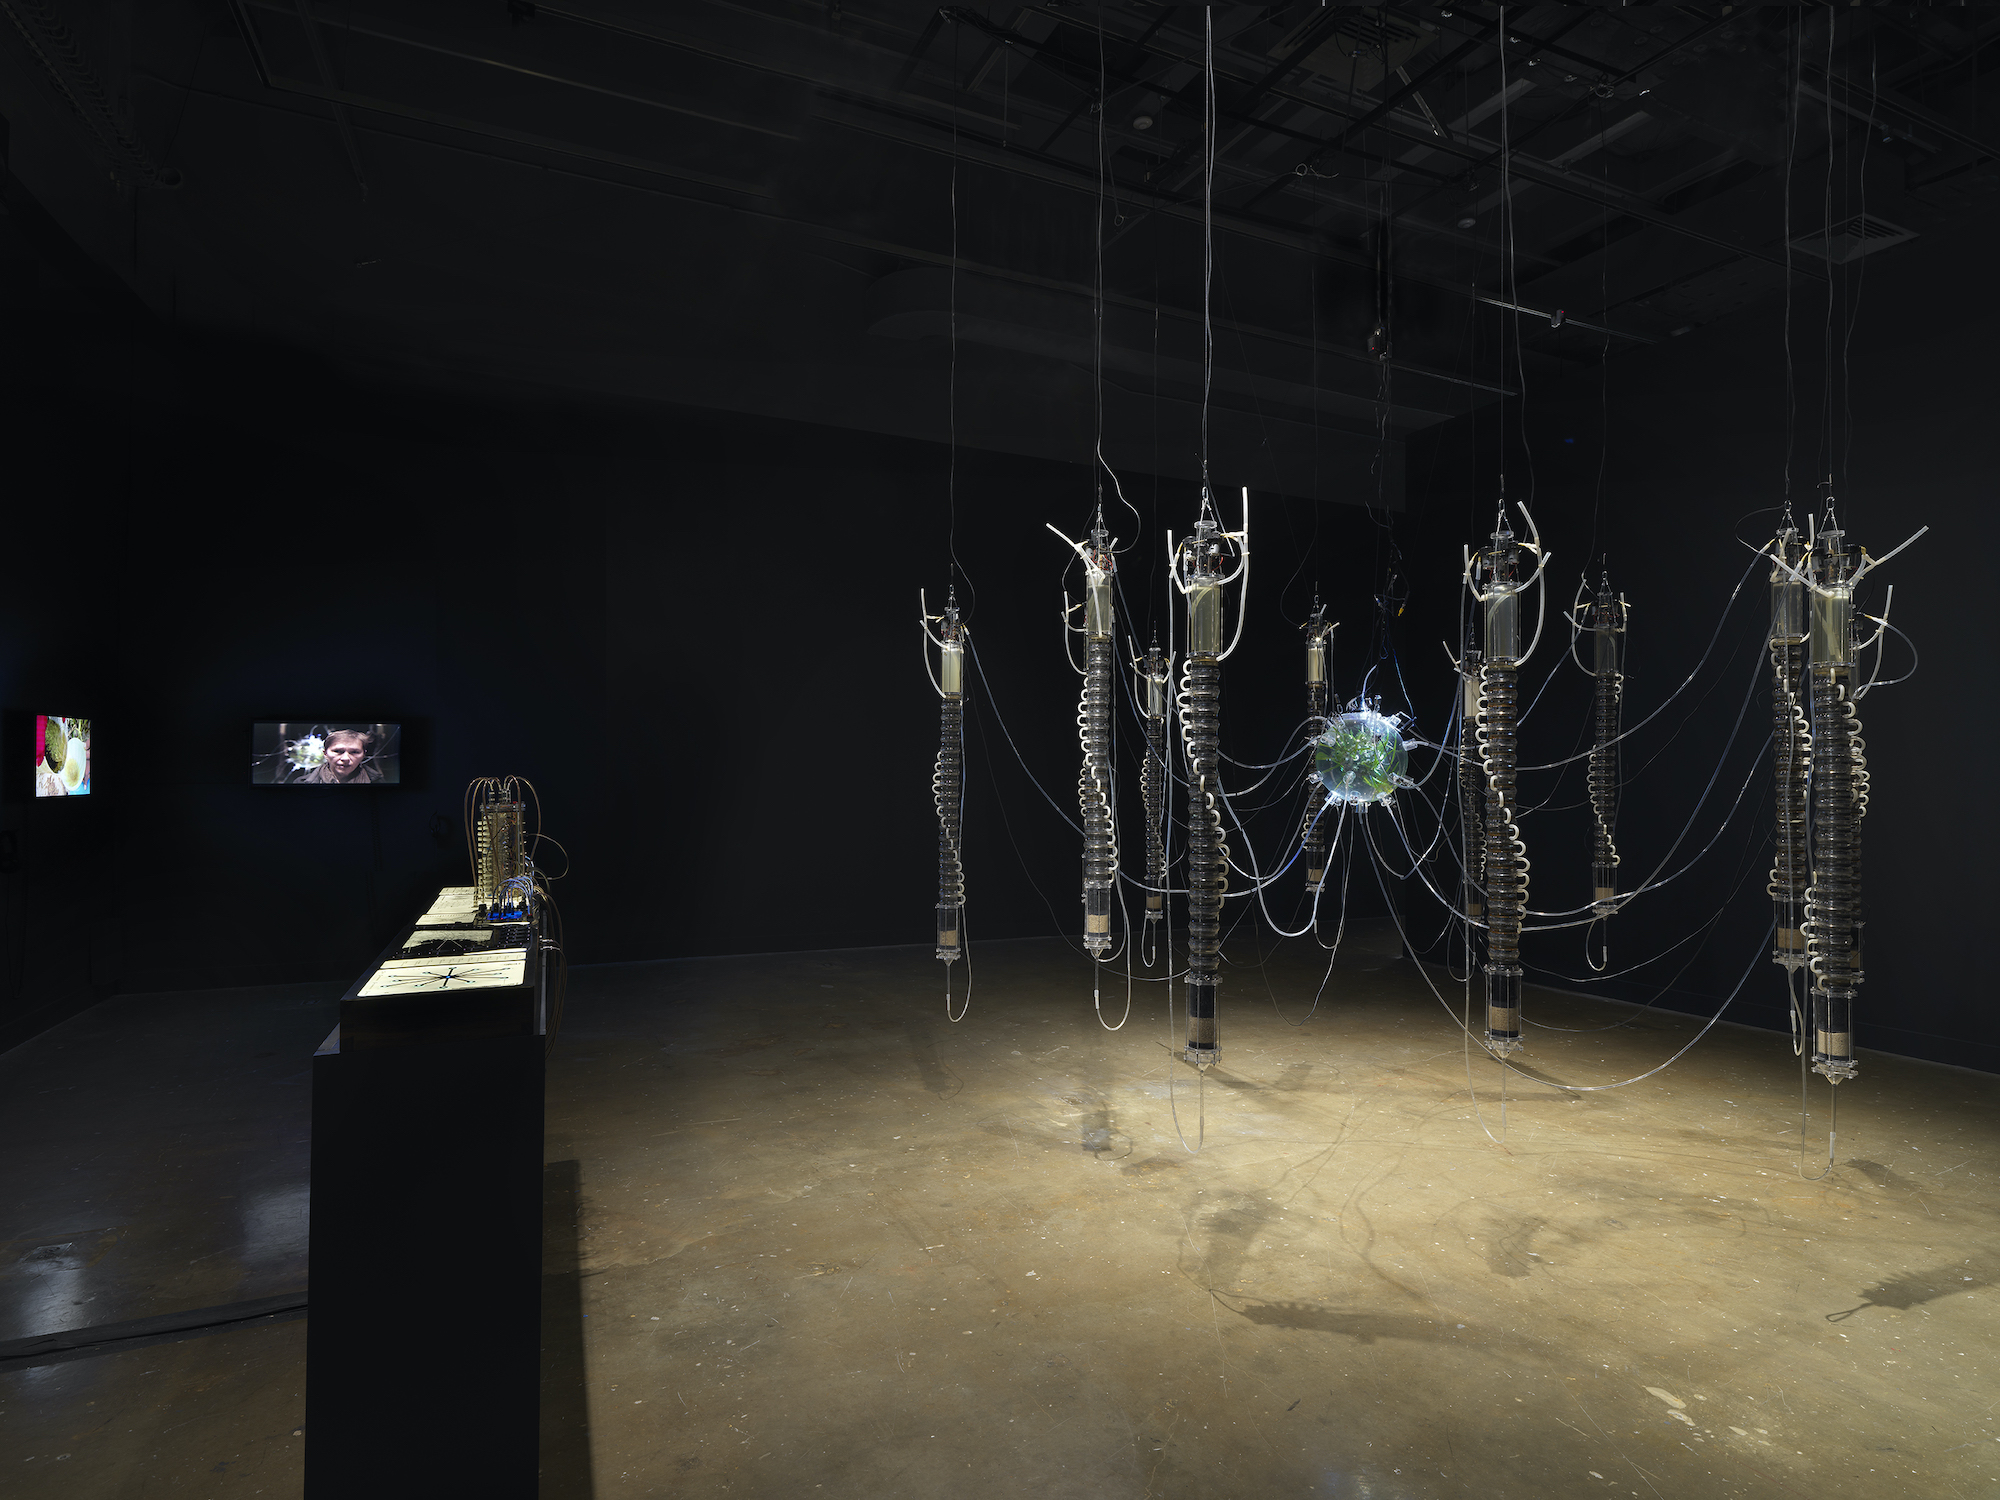 In a dark room, a large hanging sculpture made of glass, algae, and water hung from above that resembles a spider, across from a table lit to display scientific documents. Adjacent is a two - channel video.